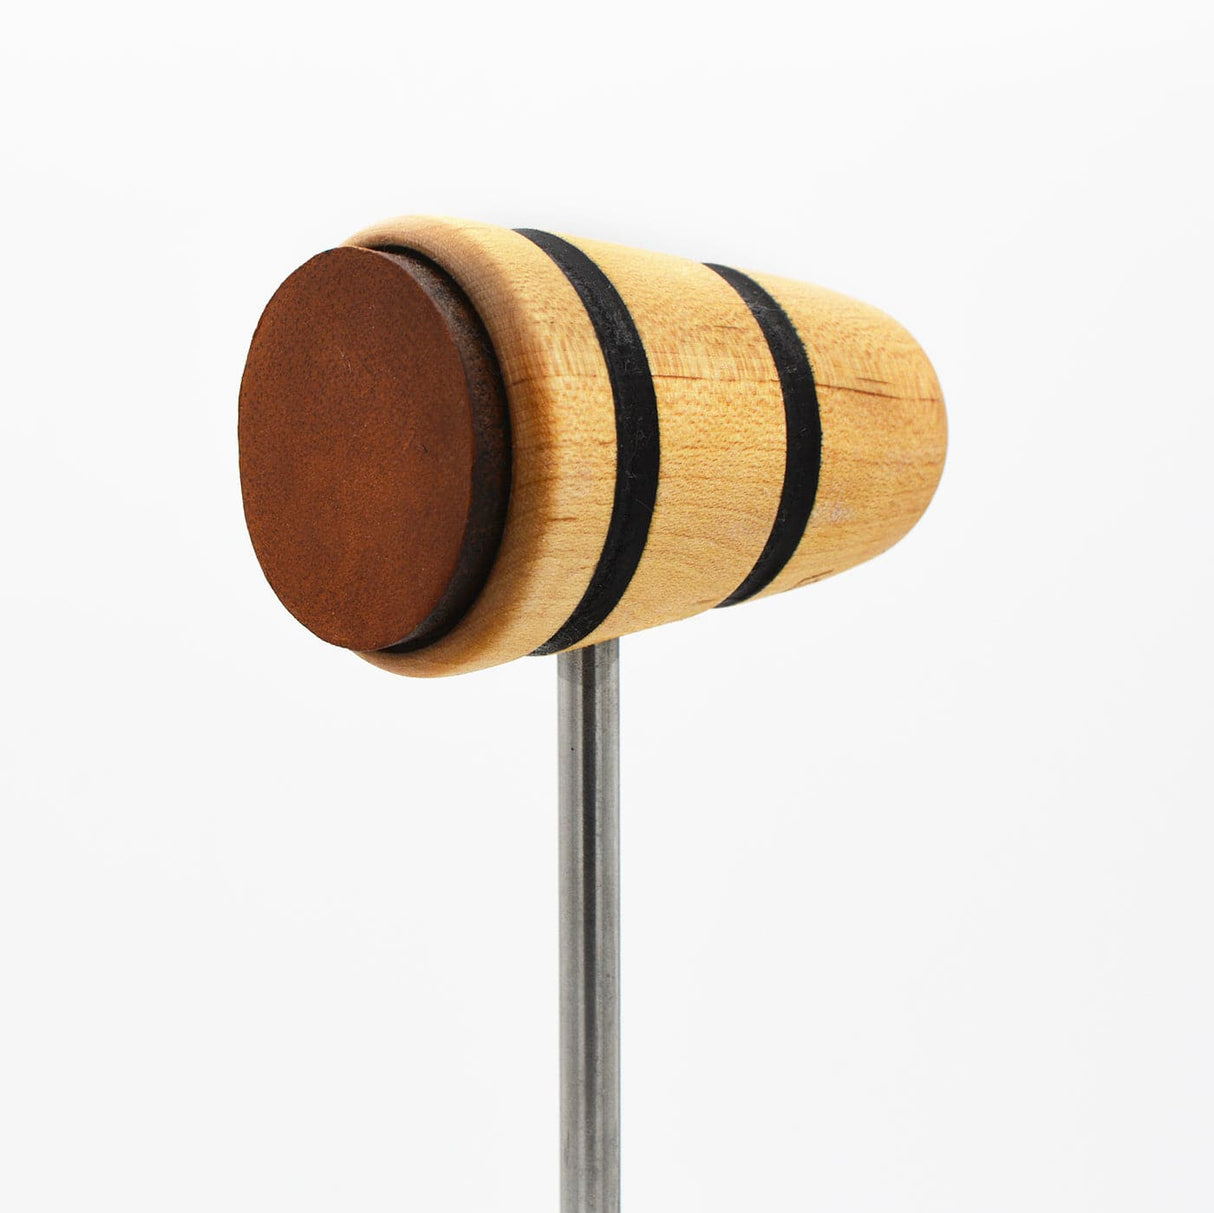 Low Boy Bass Drum Beaters - Leather Daddy, Natural with Black Stripes